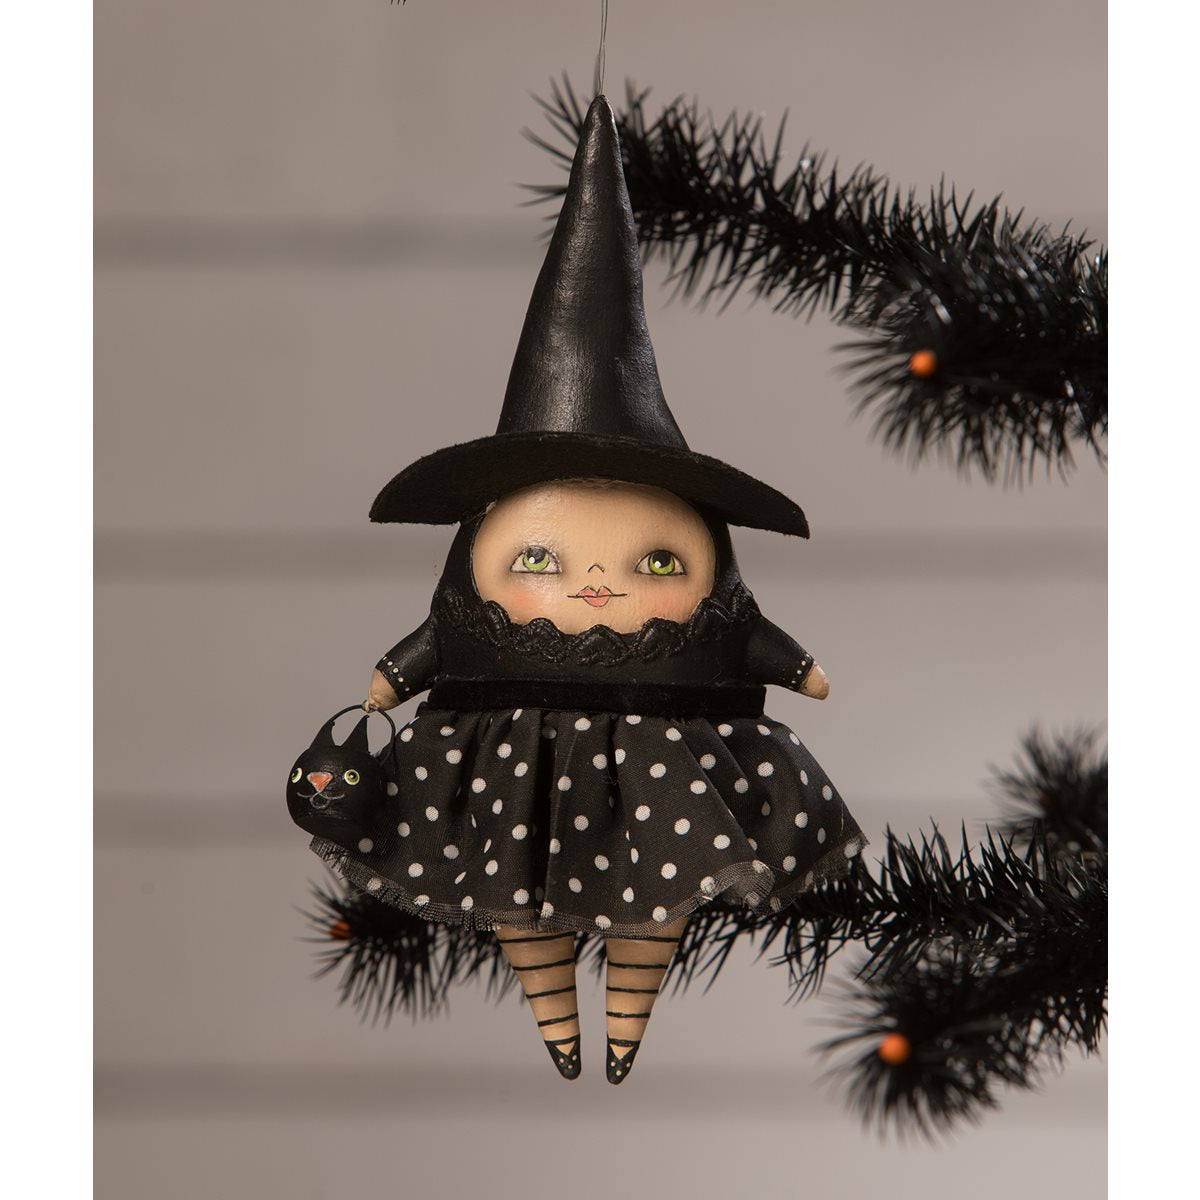 Delighted Desdemona Witch Ornament